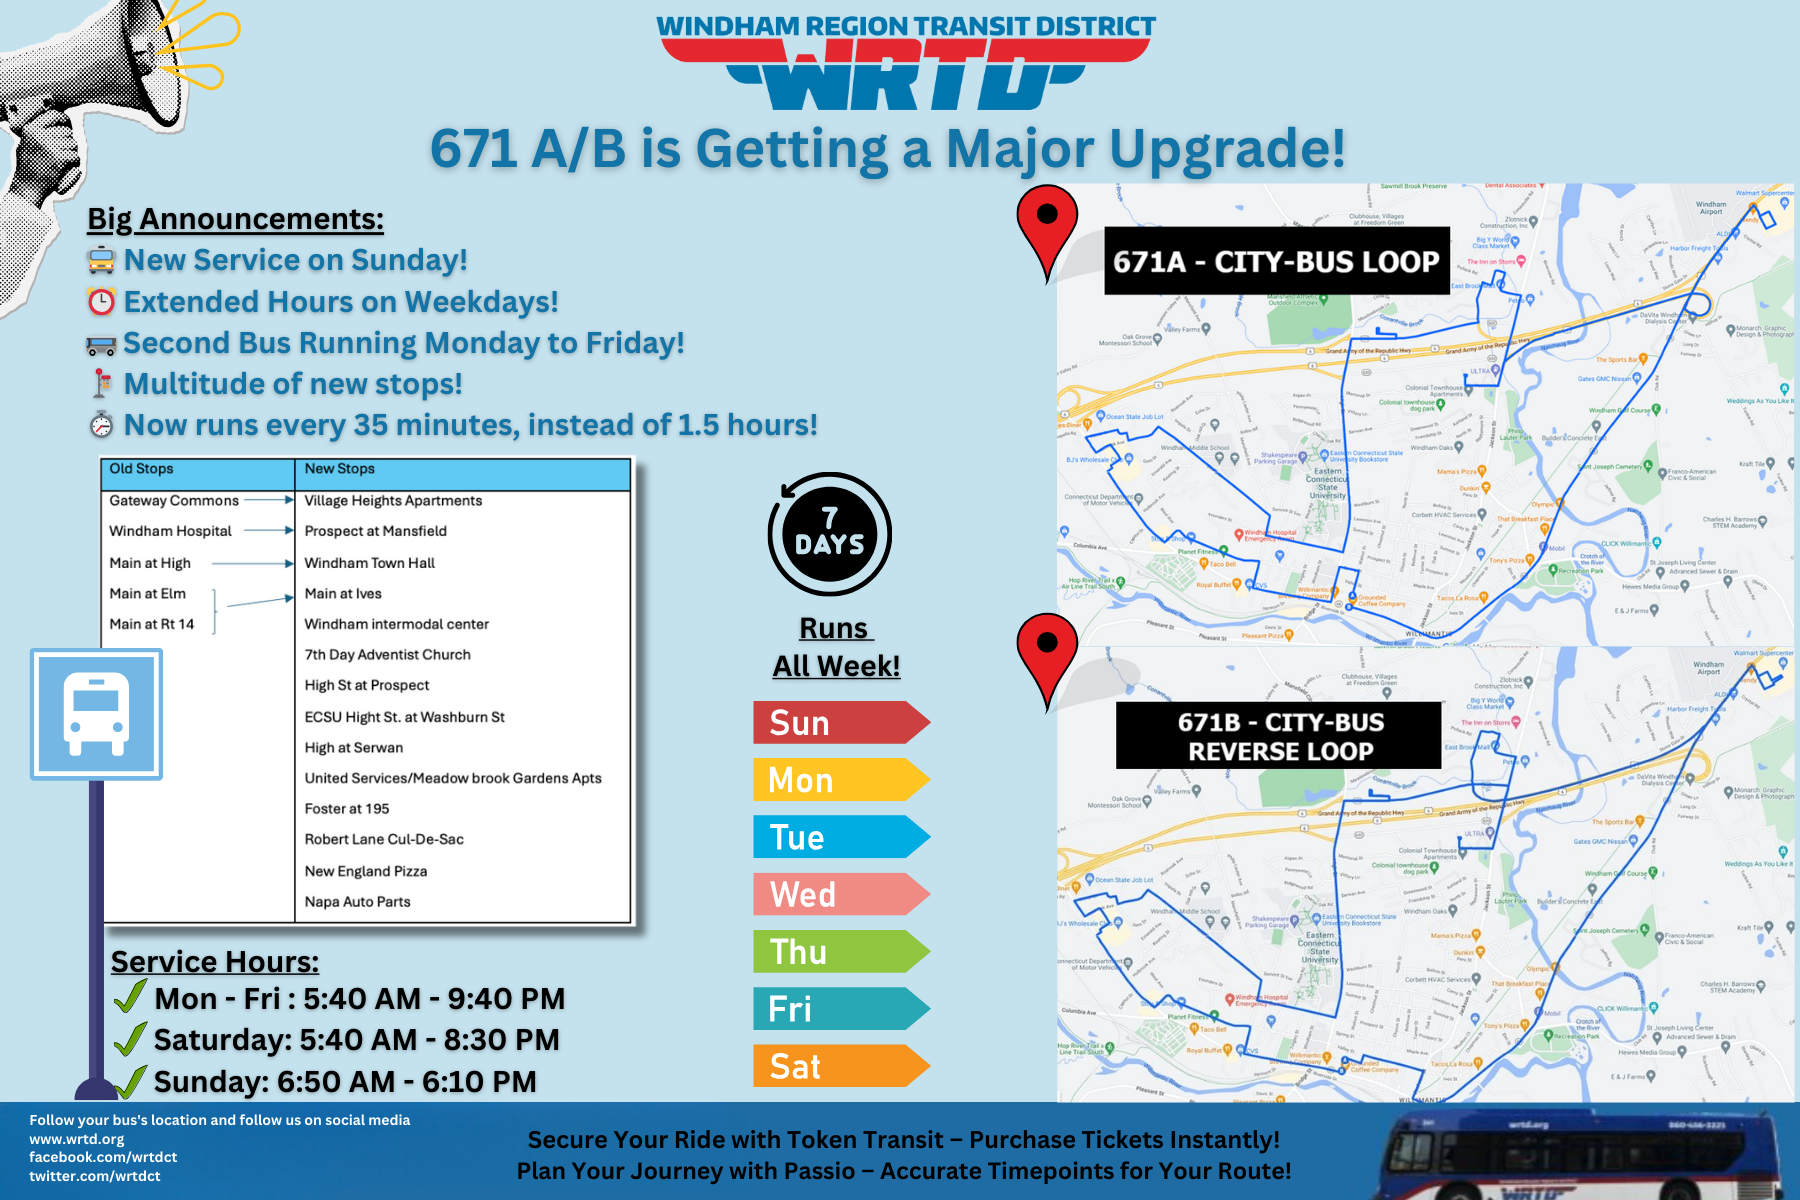 Copy of 671 AB New Route Flyer (6 x 4 in)